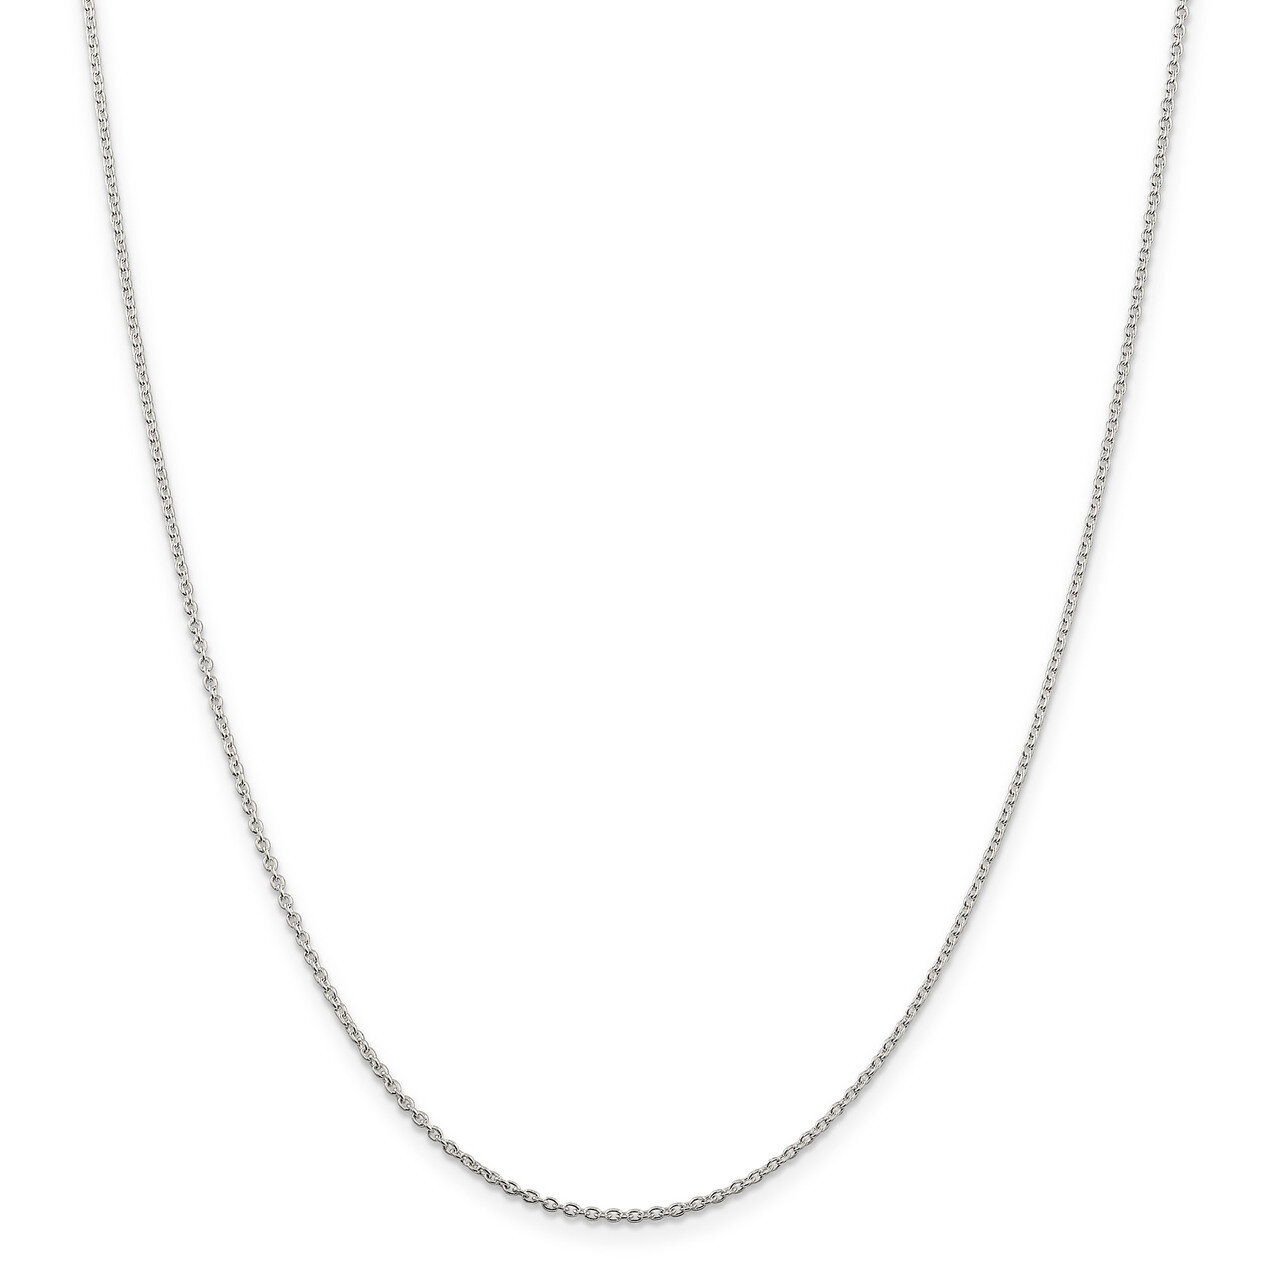 10 Inch 1.5mm Cable Chain Sterling Silver QCL040-10